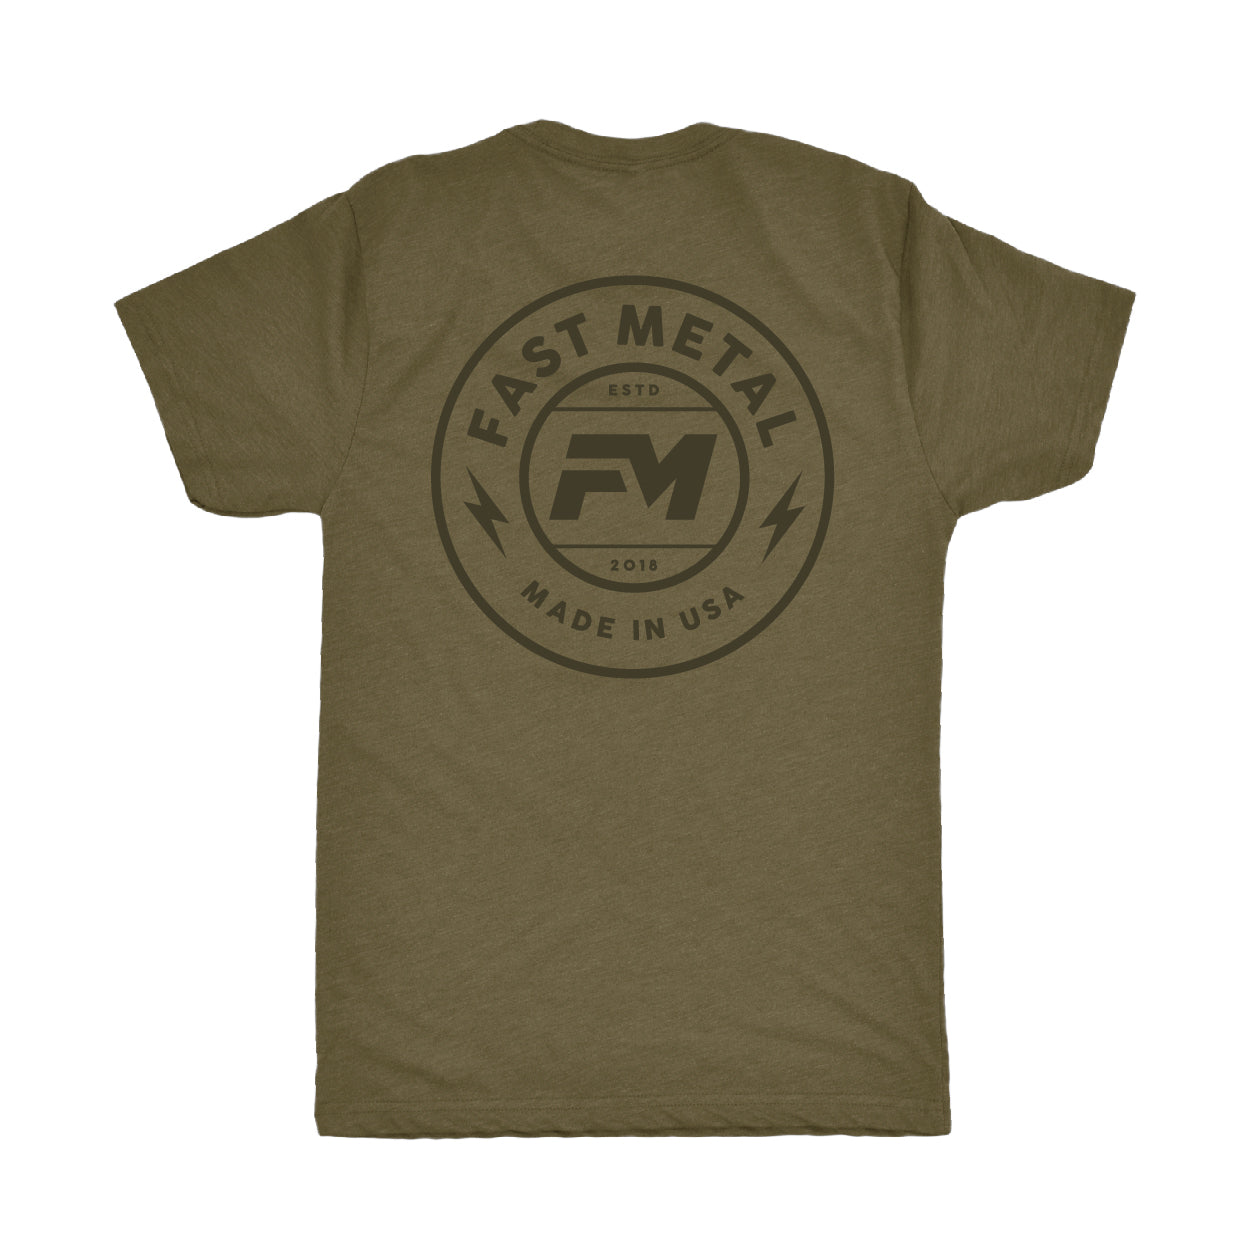 Power T-Shirt - Olive Heather – FAST METAL